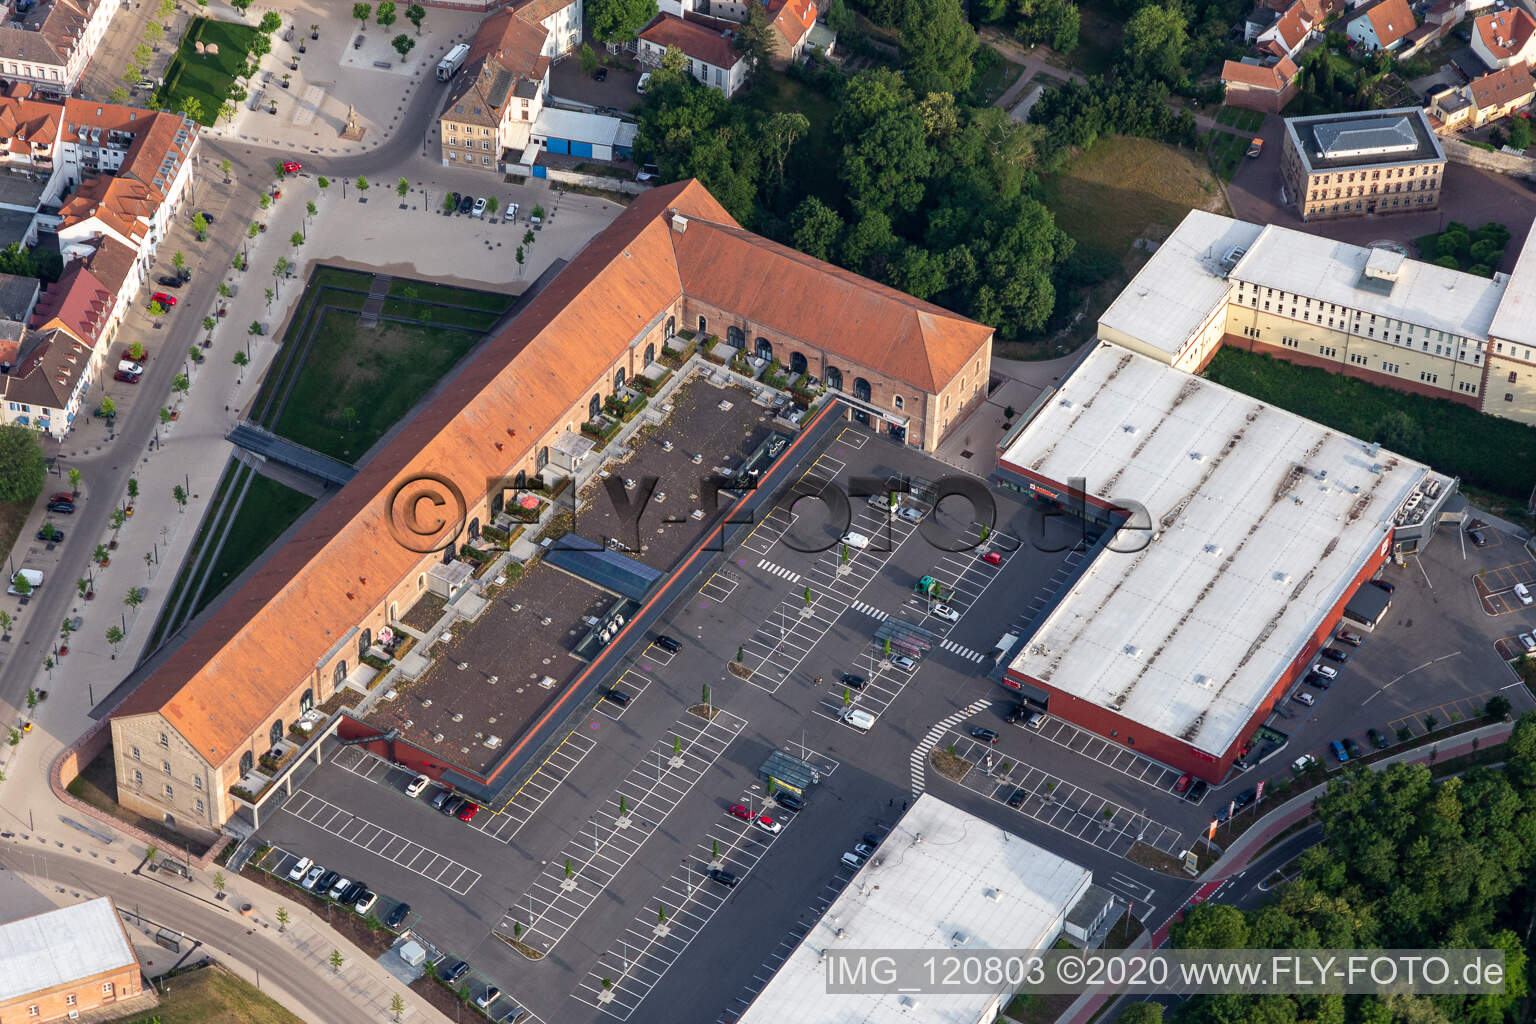 Vocational school in Germersheim in the state Rhineland-Palatinate, Germany